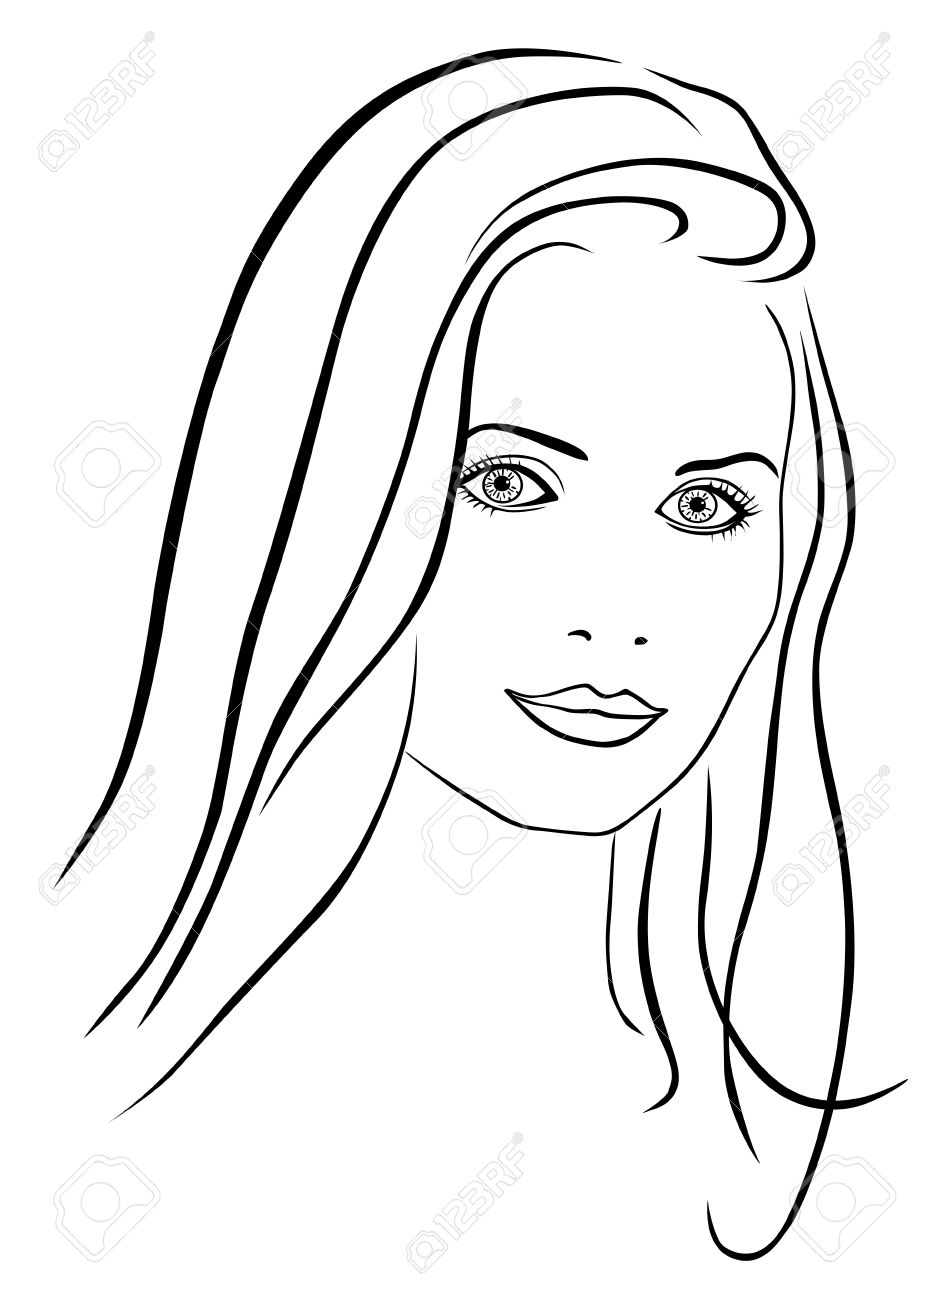 Pretty Lady Drawing | Free download on ClipArtMag